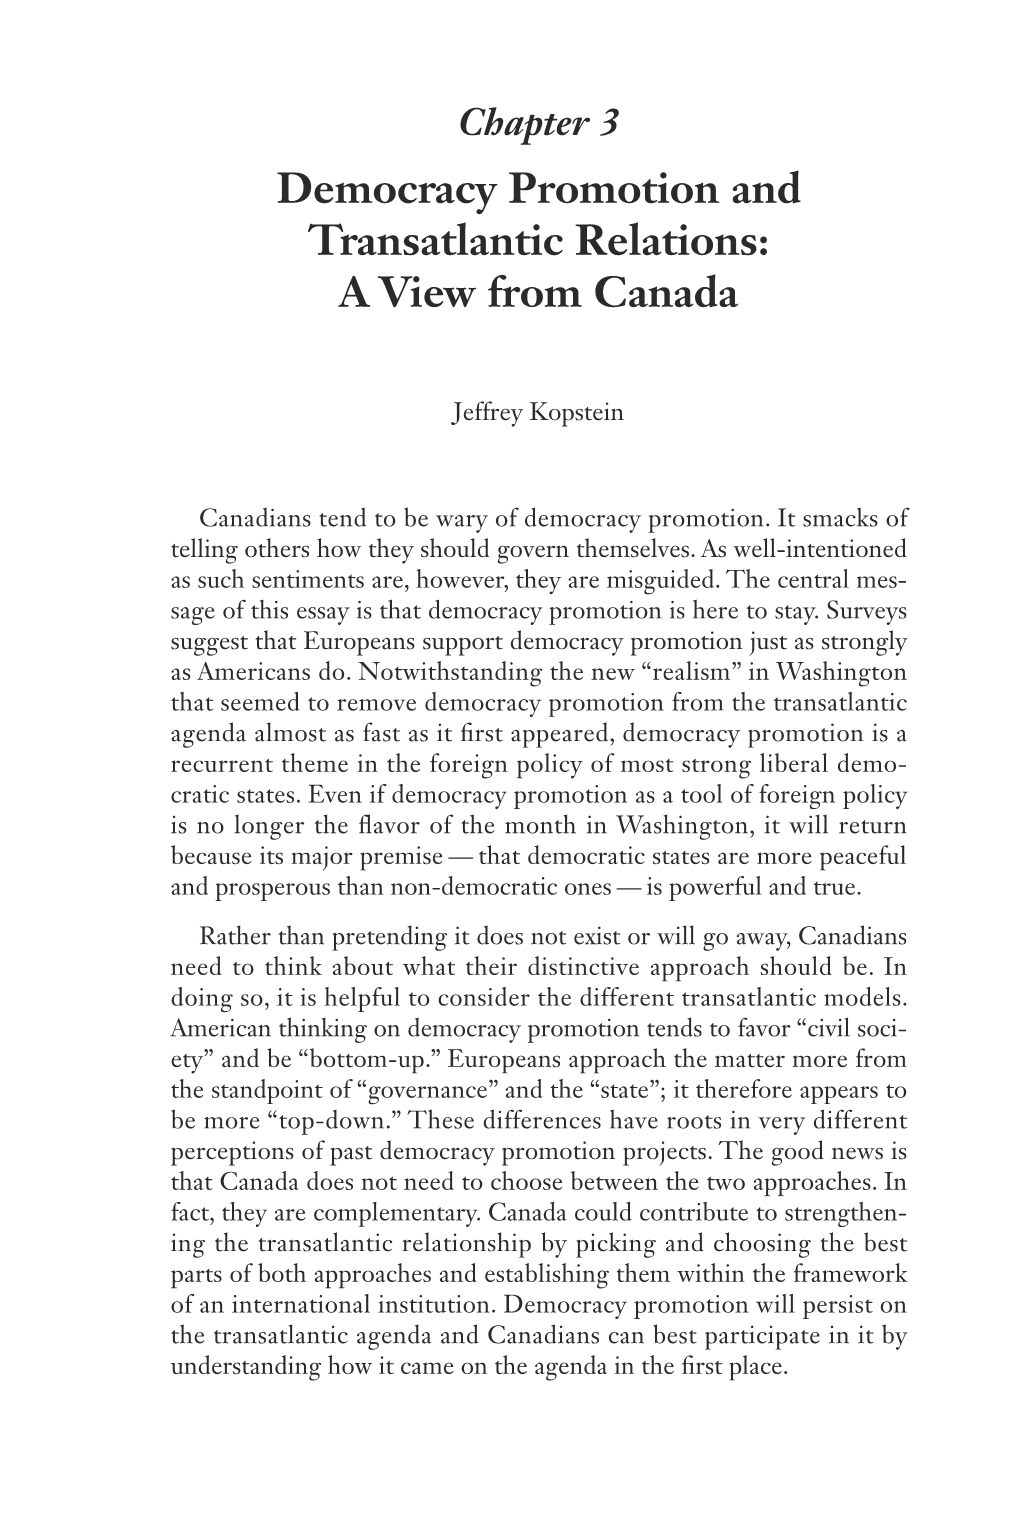 Democracy Promotion and Transatlantic Relations: a View from Canada